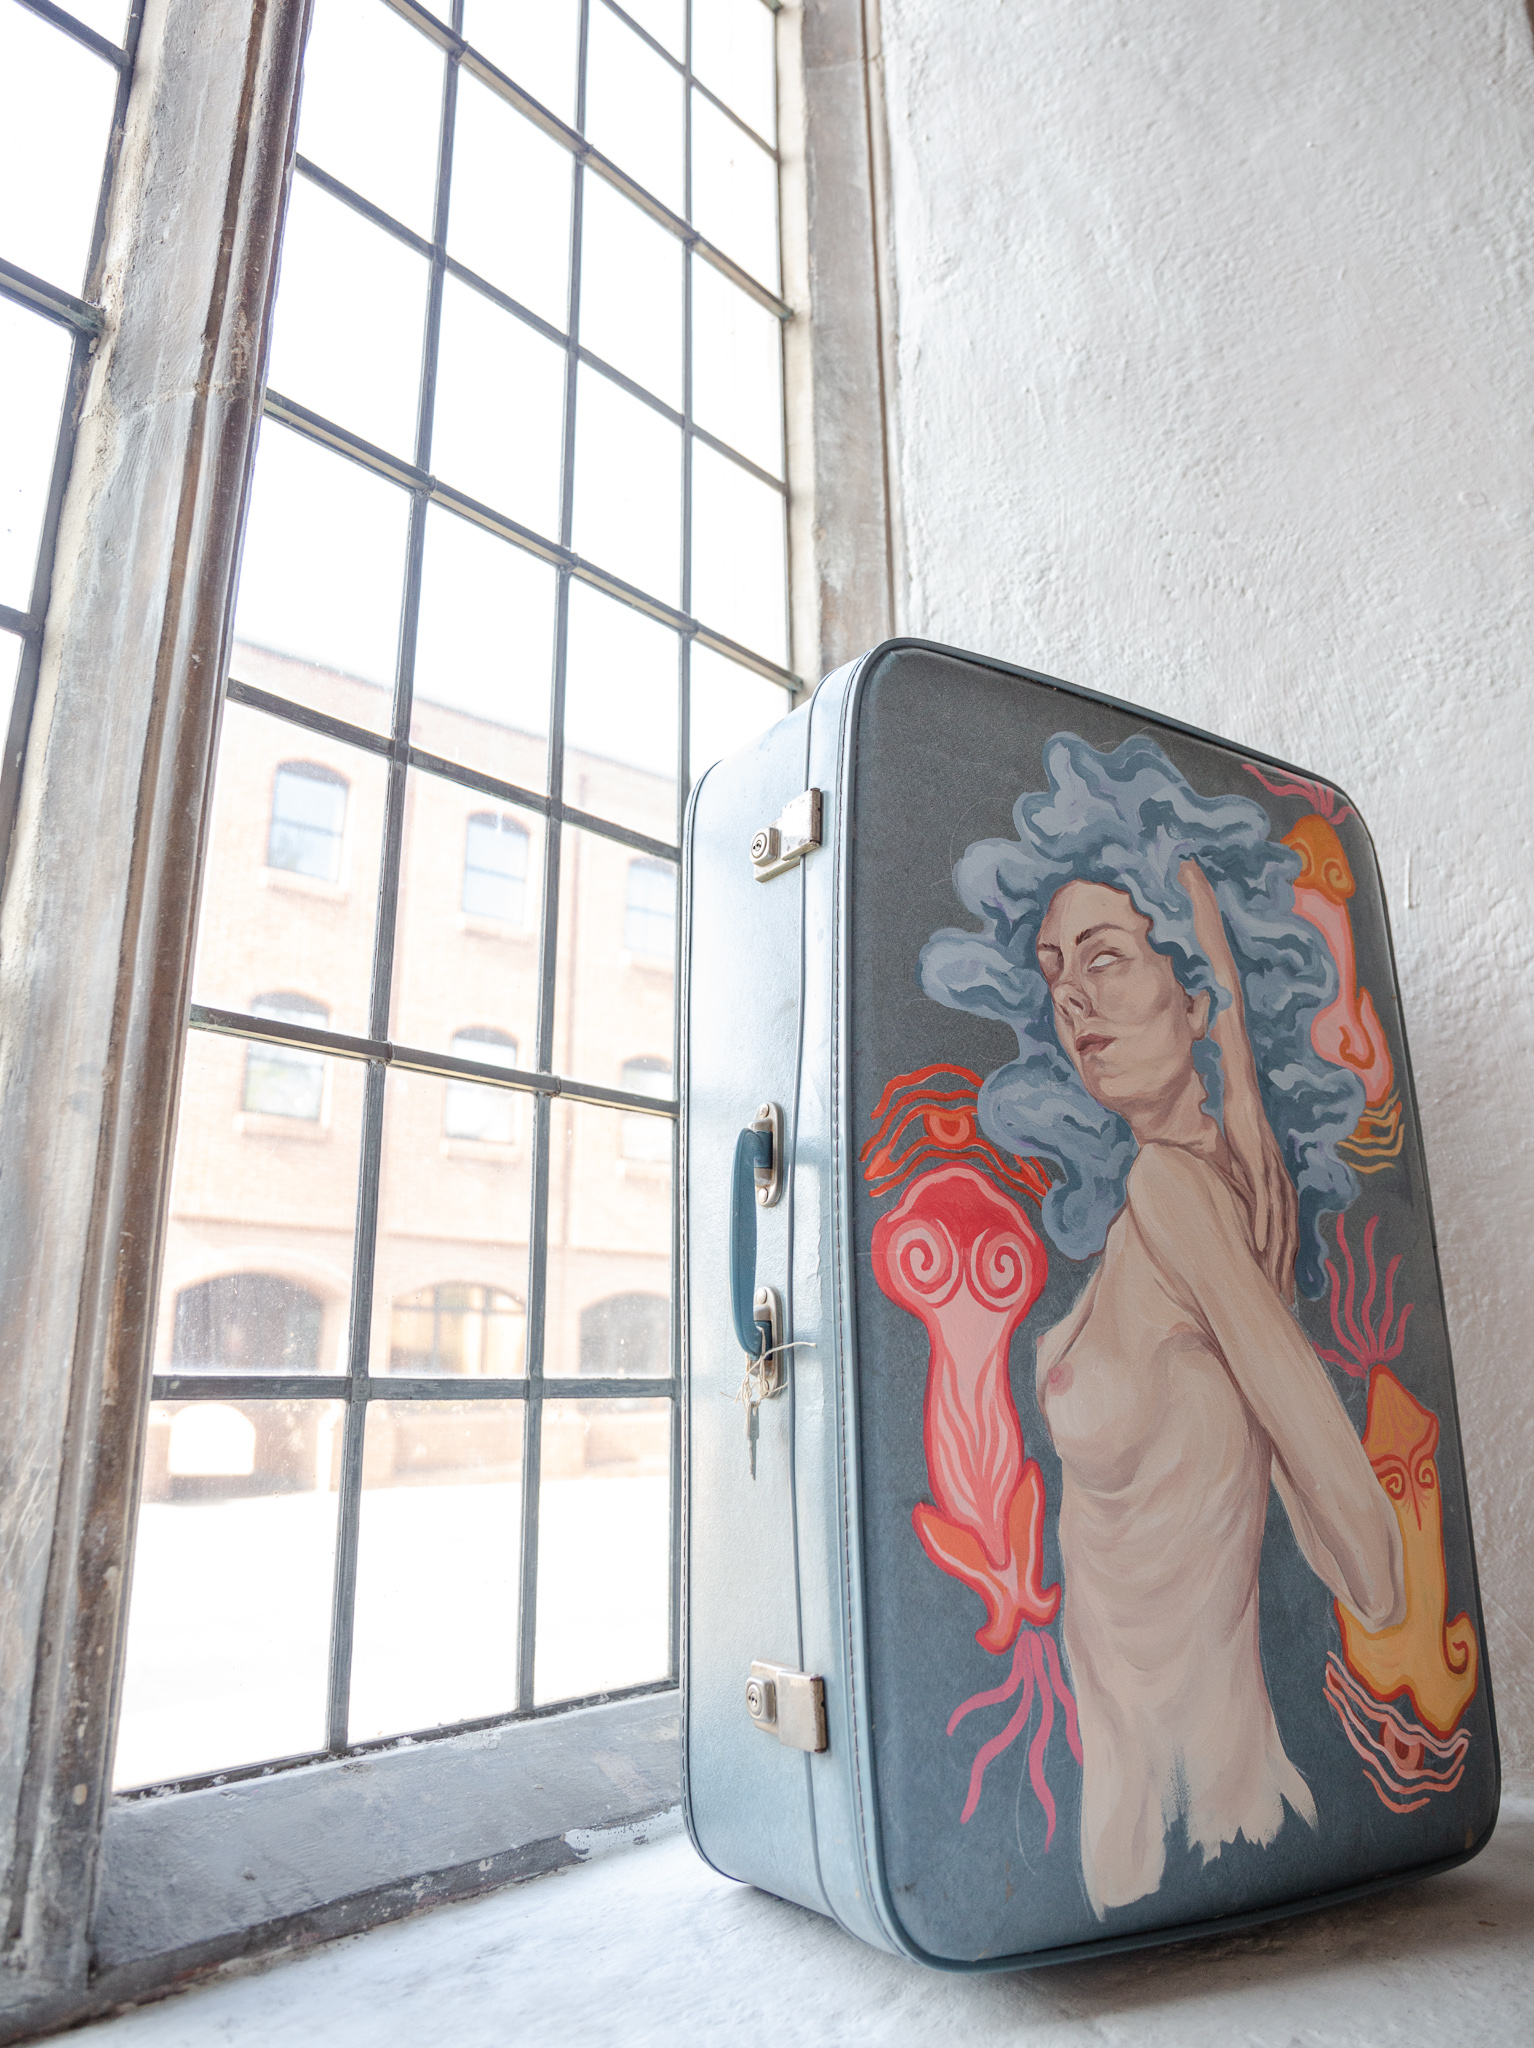 Fine art work by Elly Lynn, Acrylic painting on suitcase, showing imagery of the female form and creation symbology.